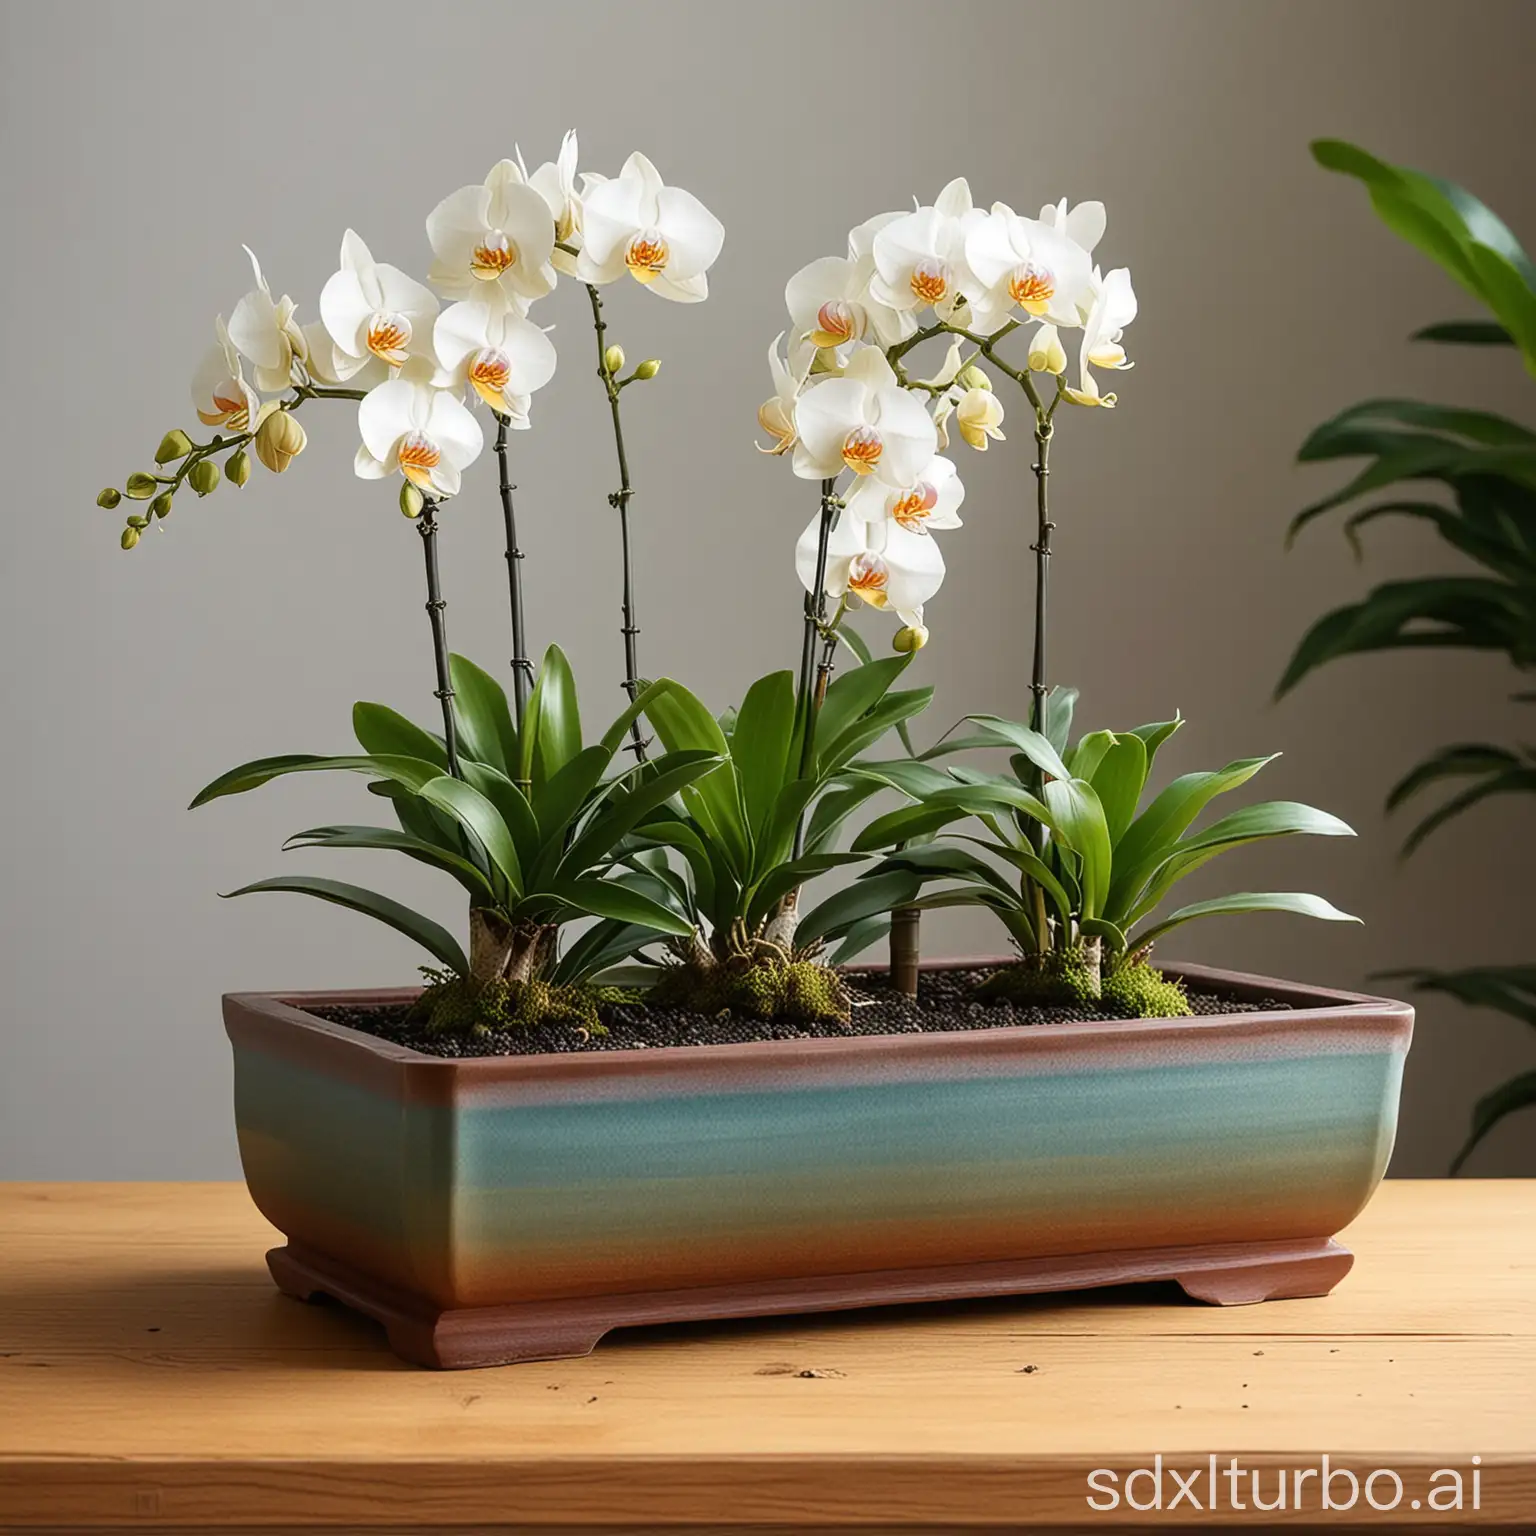 Rectangular-Bonsai-Pot-with-Orchids-Indoor-Plant-Display-for-Bright-Spaces